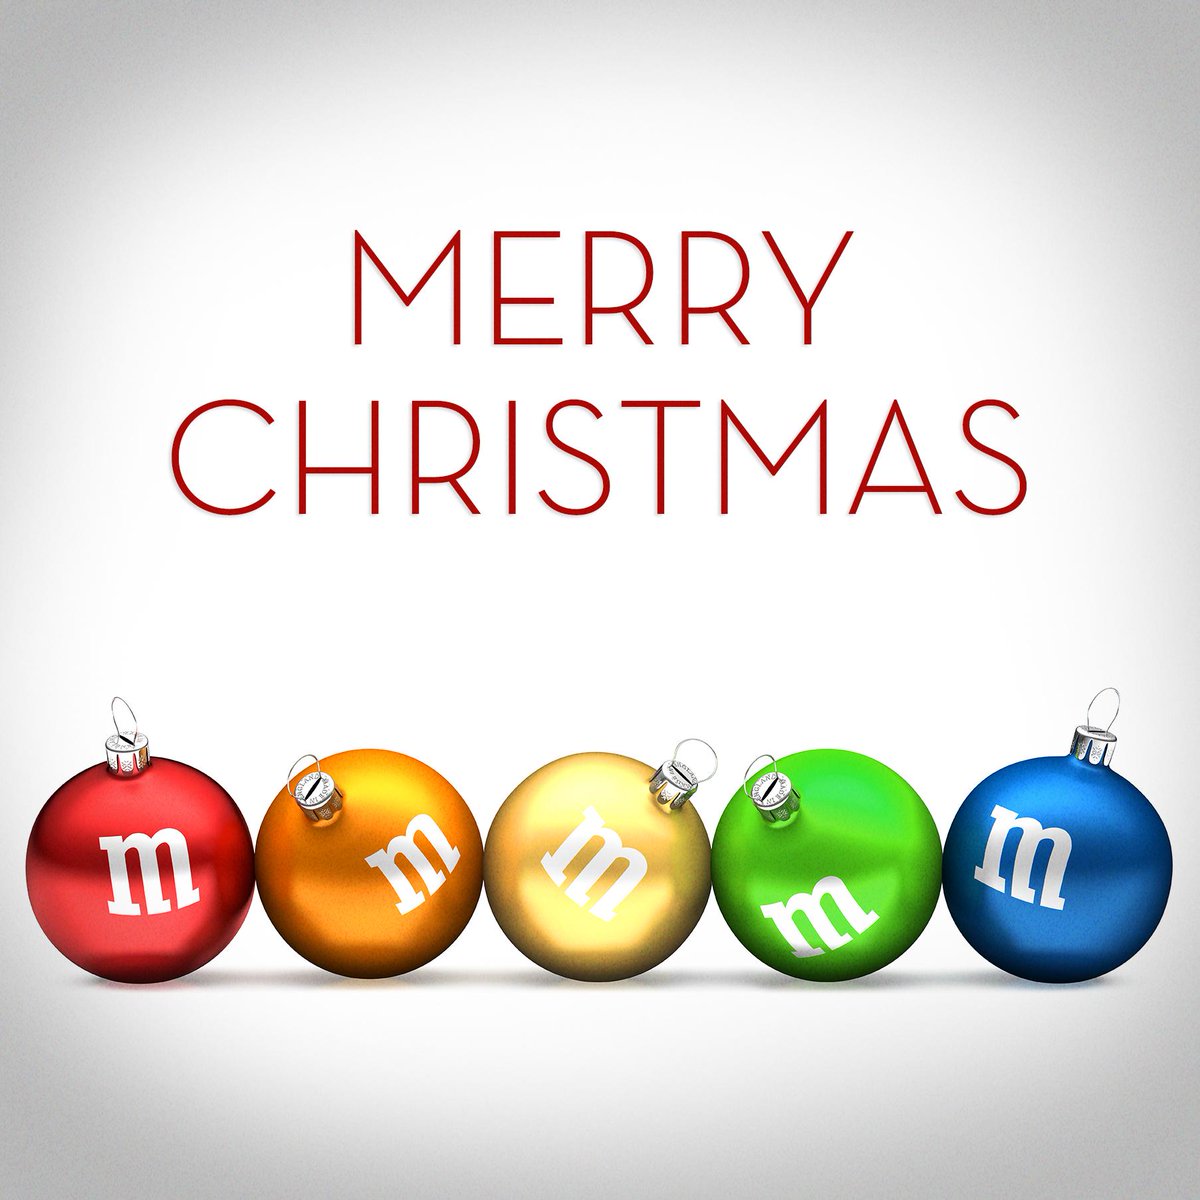 M&M'S on X: We wish you a very Merry Christmas! -The M&M'S Crew   / X